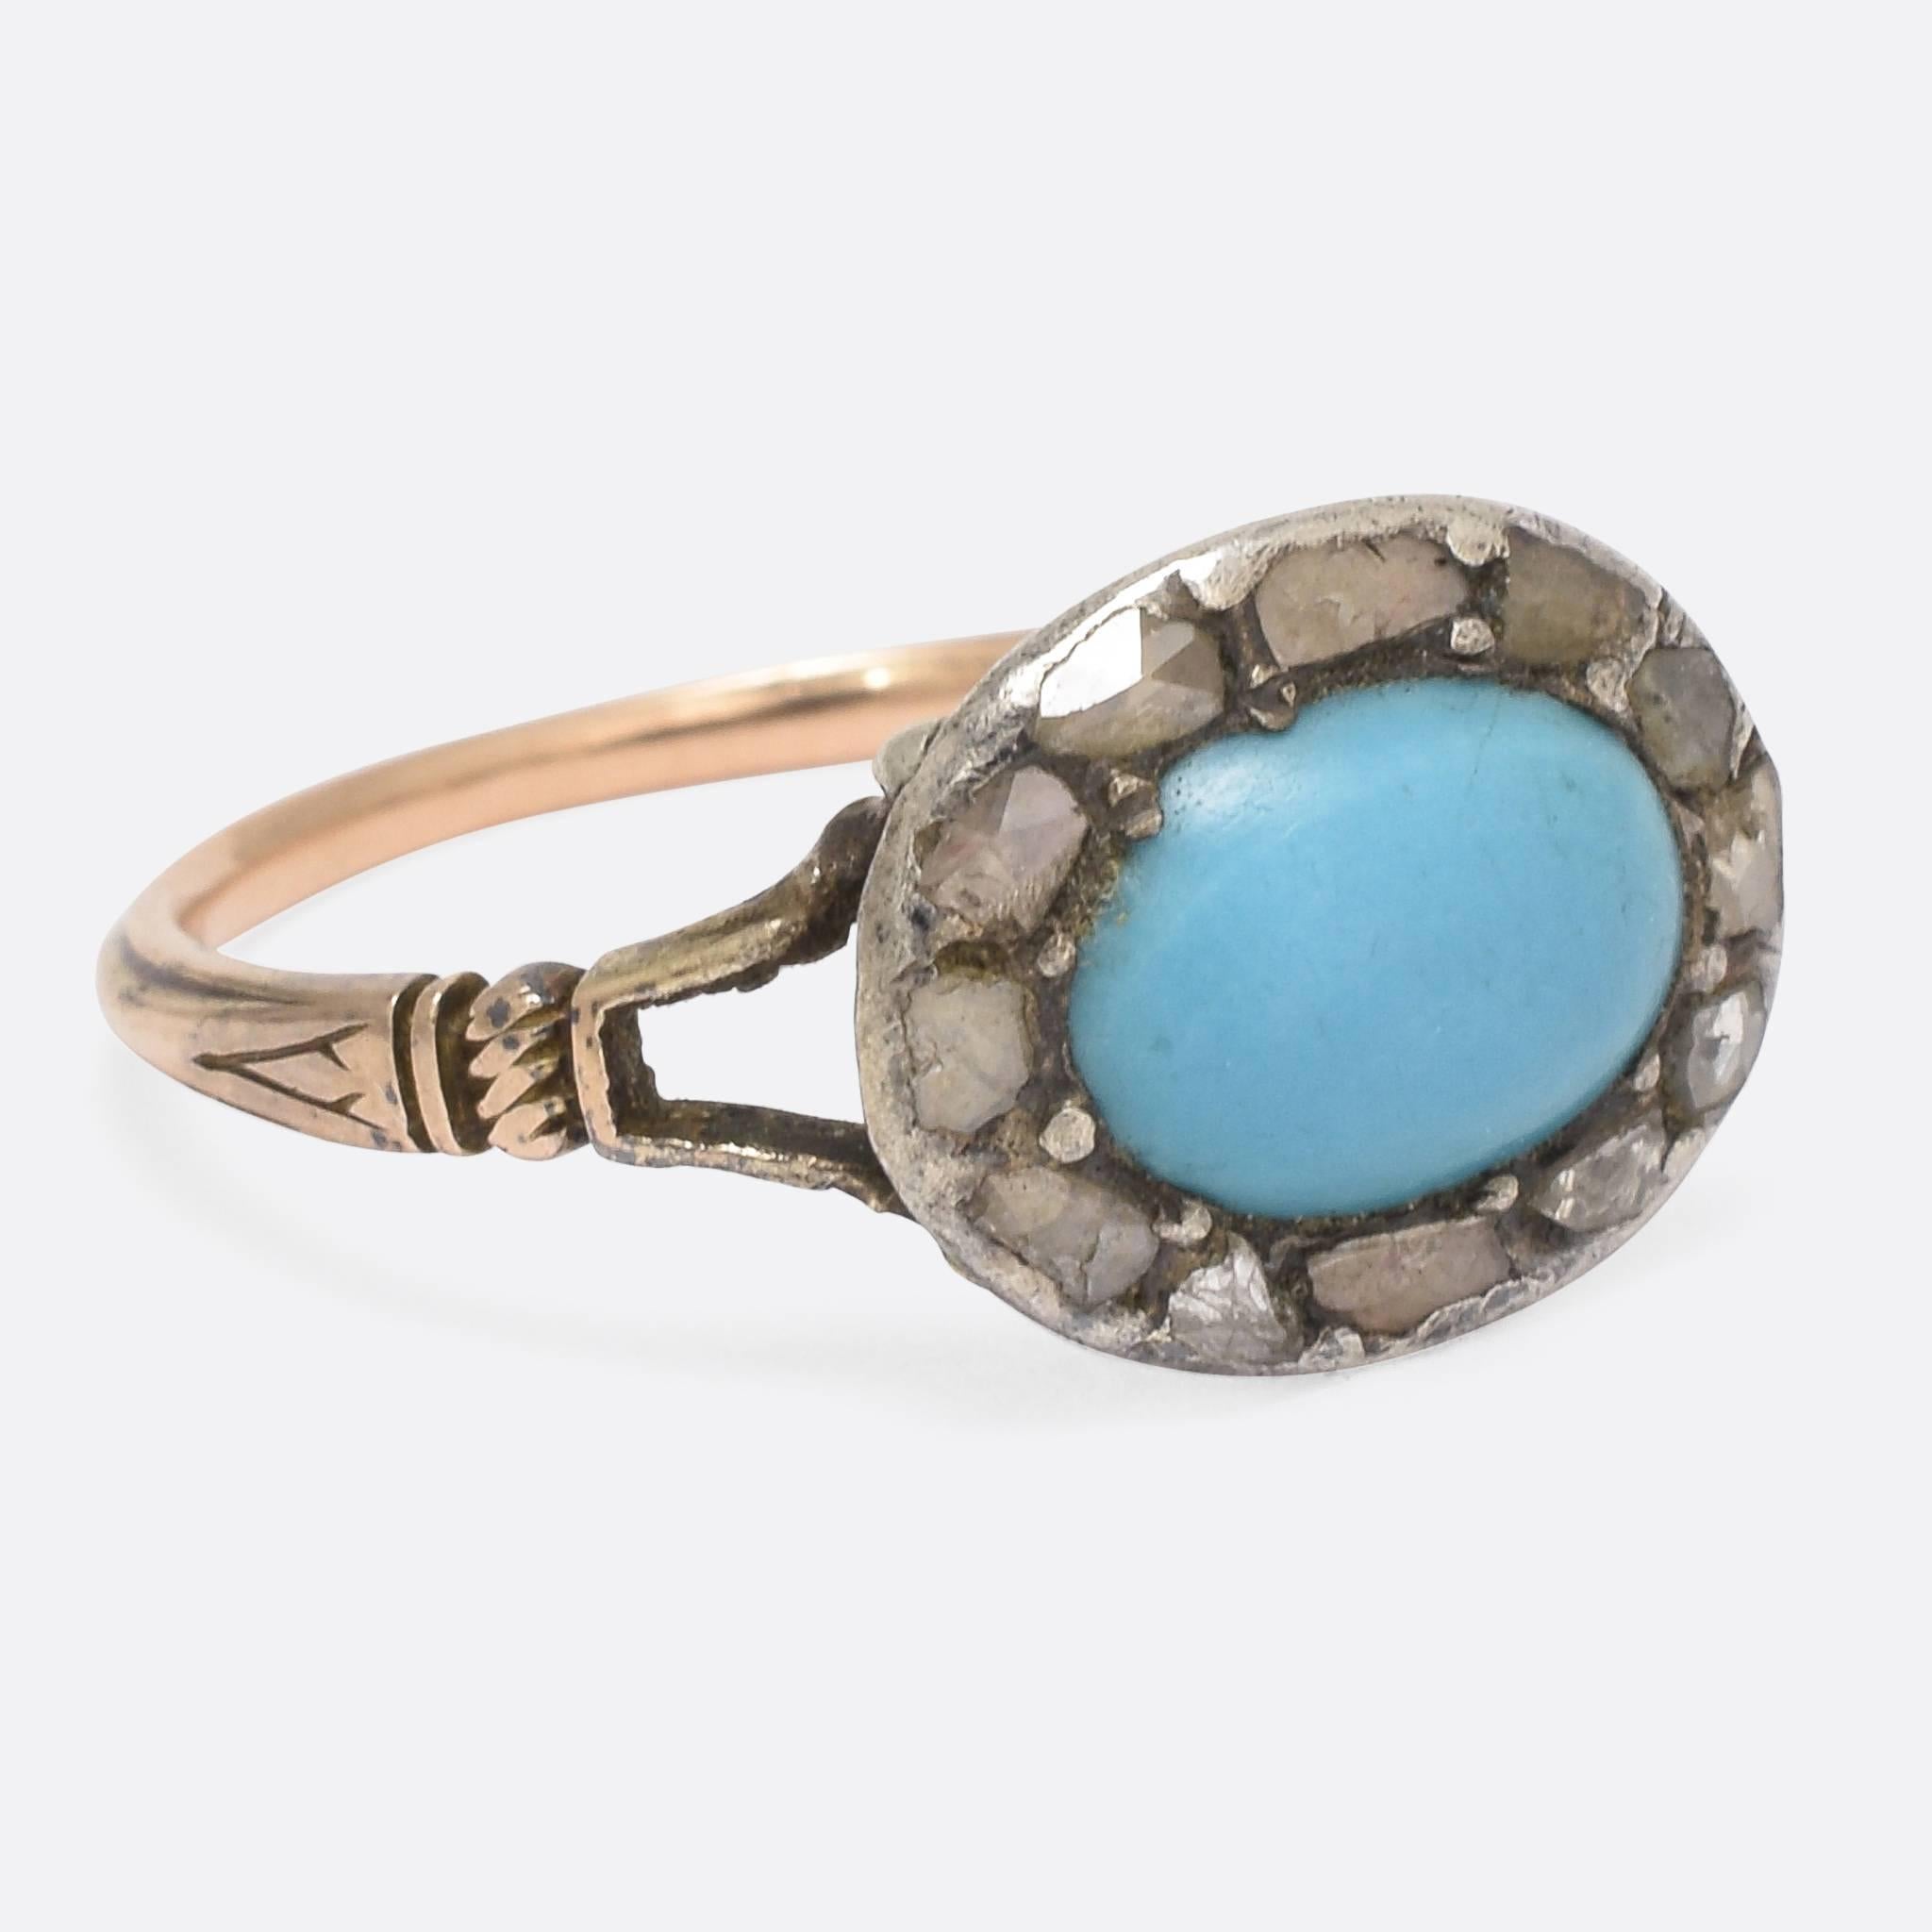 This elegant George III period cluster ring is set with a central turquoise cabochon, surrounded by a halo of glistening rose cut diamonds. The closed backed head features attractive fluted detail, and the split shoulders display futher hand-chased